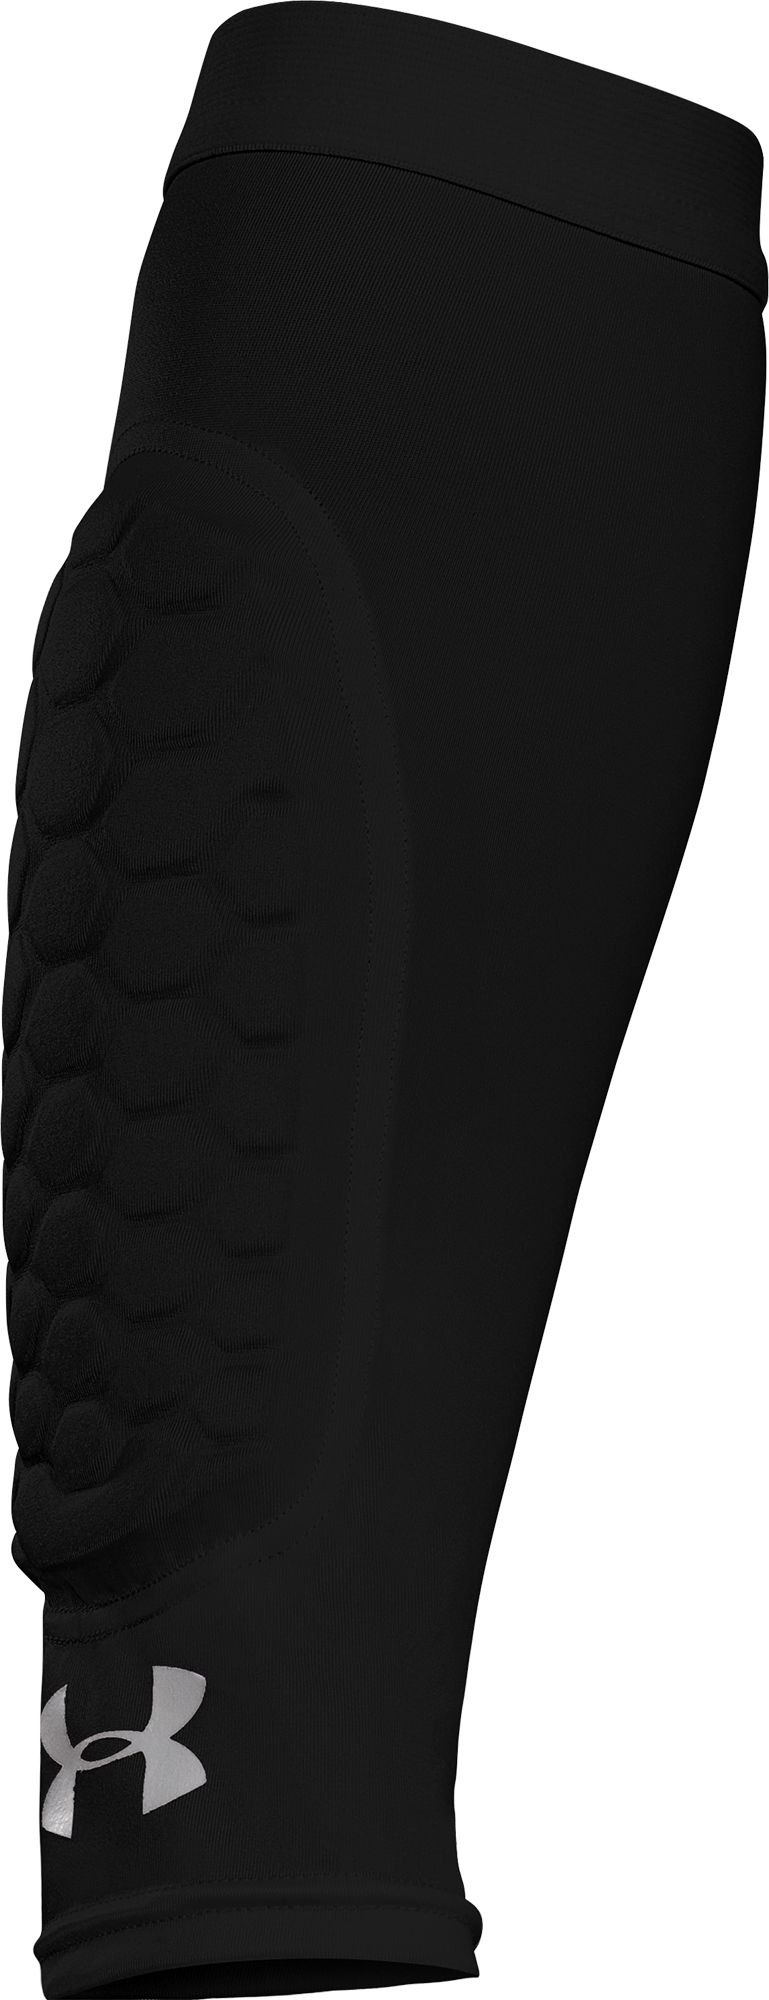 Under Armour Adult Game Day Armour Pro Forearm Pads